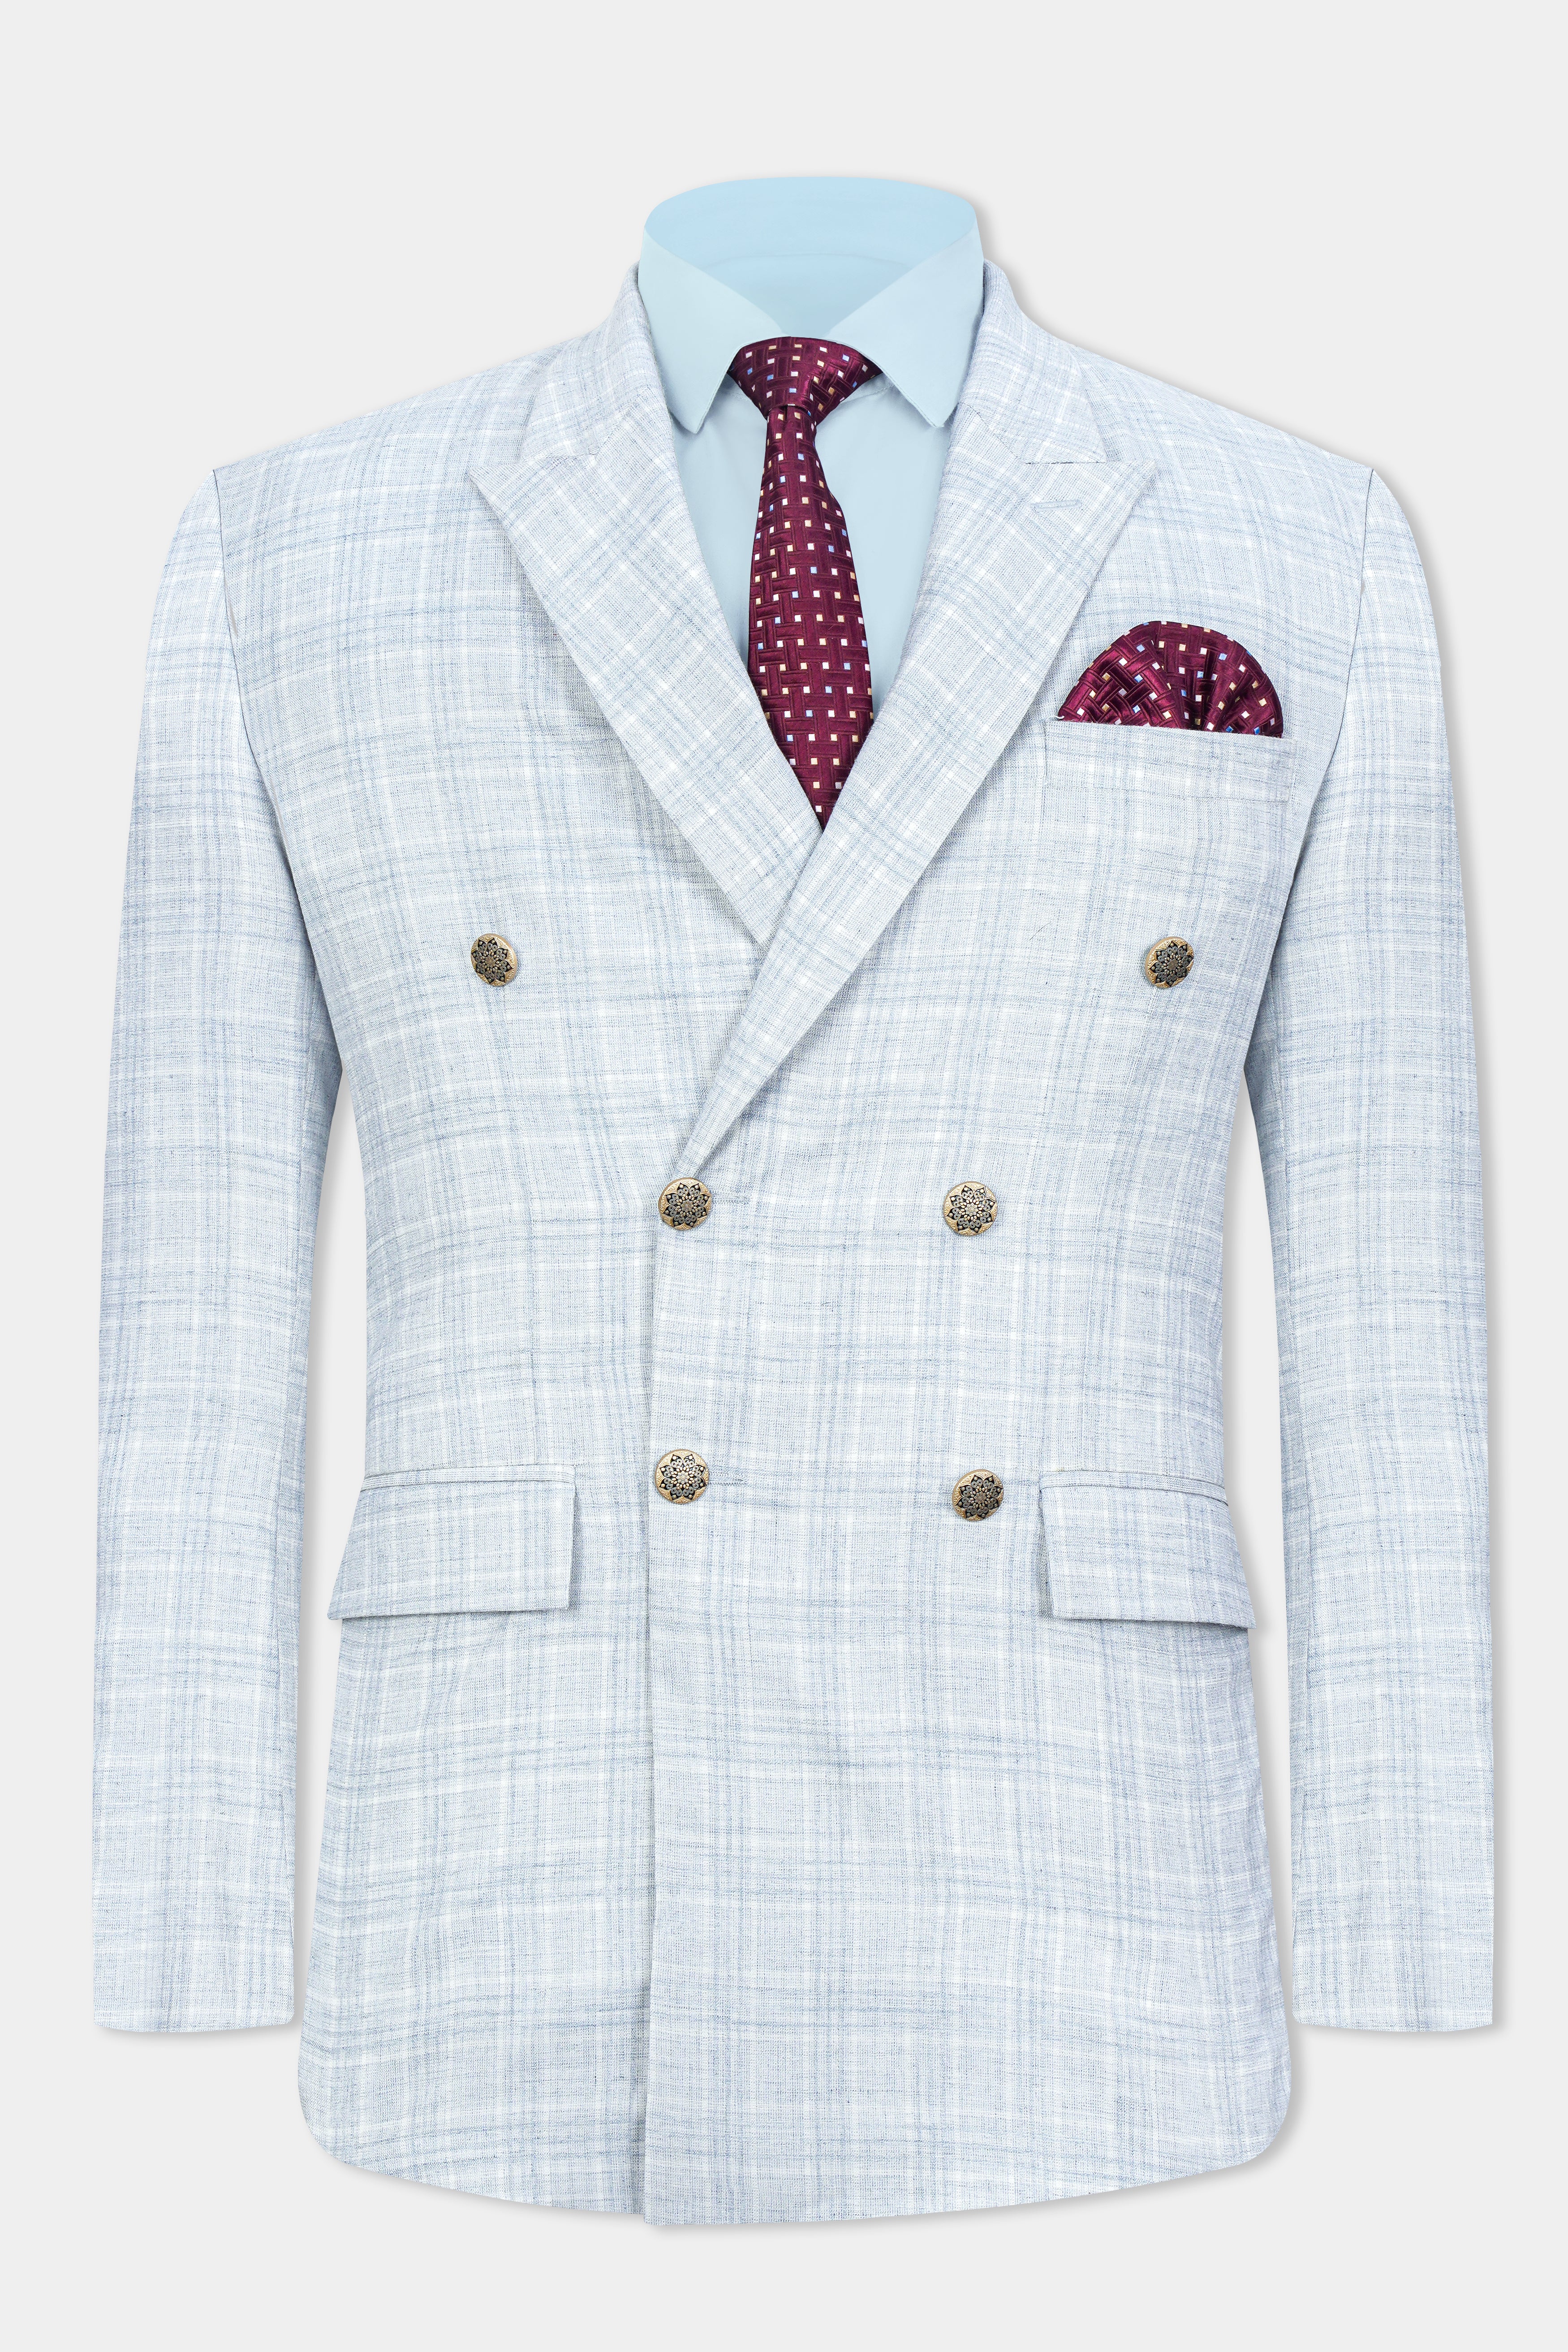 Gainsboro Blue Plaid Wool Rich Double Breasted Blazer BL3076-DB-GB-36, BL3076-DB-GB-38, BL3076-DB-GB-40, BL3076-DB-GB-42, BL3076-DB-GB-44, BL3076-DB-GB-46, BL3076-DB-GB-48, BL3076-DB-GB-50, BL3076-DB-GB-52, BL3076-DB-GB-54, BL3076-DB-GB-56, BL3076-DB-GB-58, BL3076-DB-GB-60